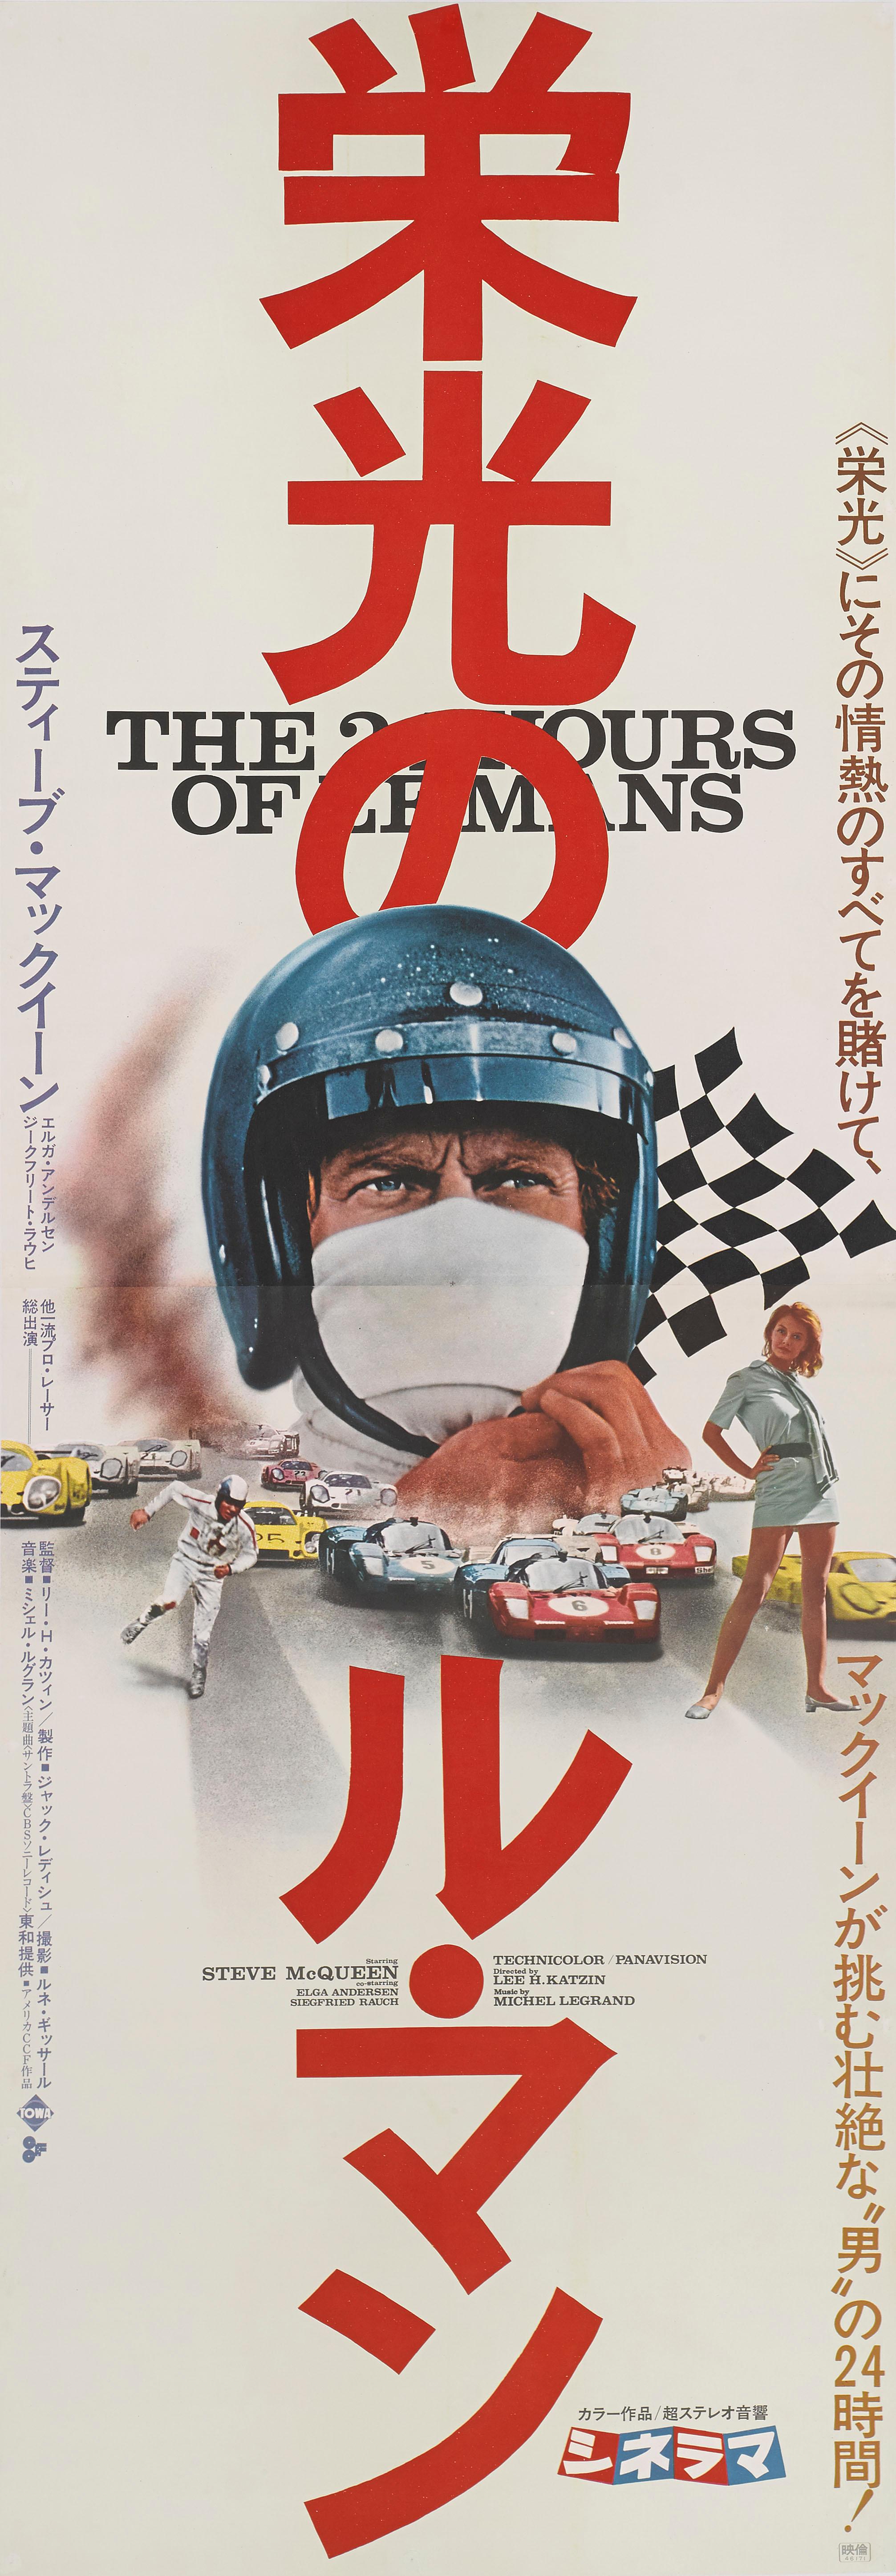 Original Japanese film poster for Steve McQueen's Classic 1971 racing movie.
This film, directed by Lee H. Katzin, portrays the famous Le Mans 24 Hour endurance motor race, and stars Steve McQueen. It was shot on location at the Le Mans circuit